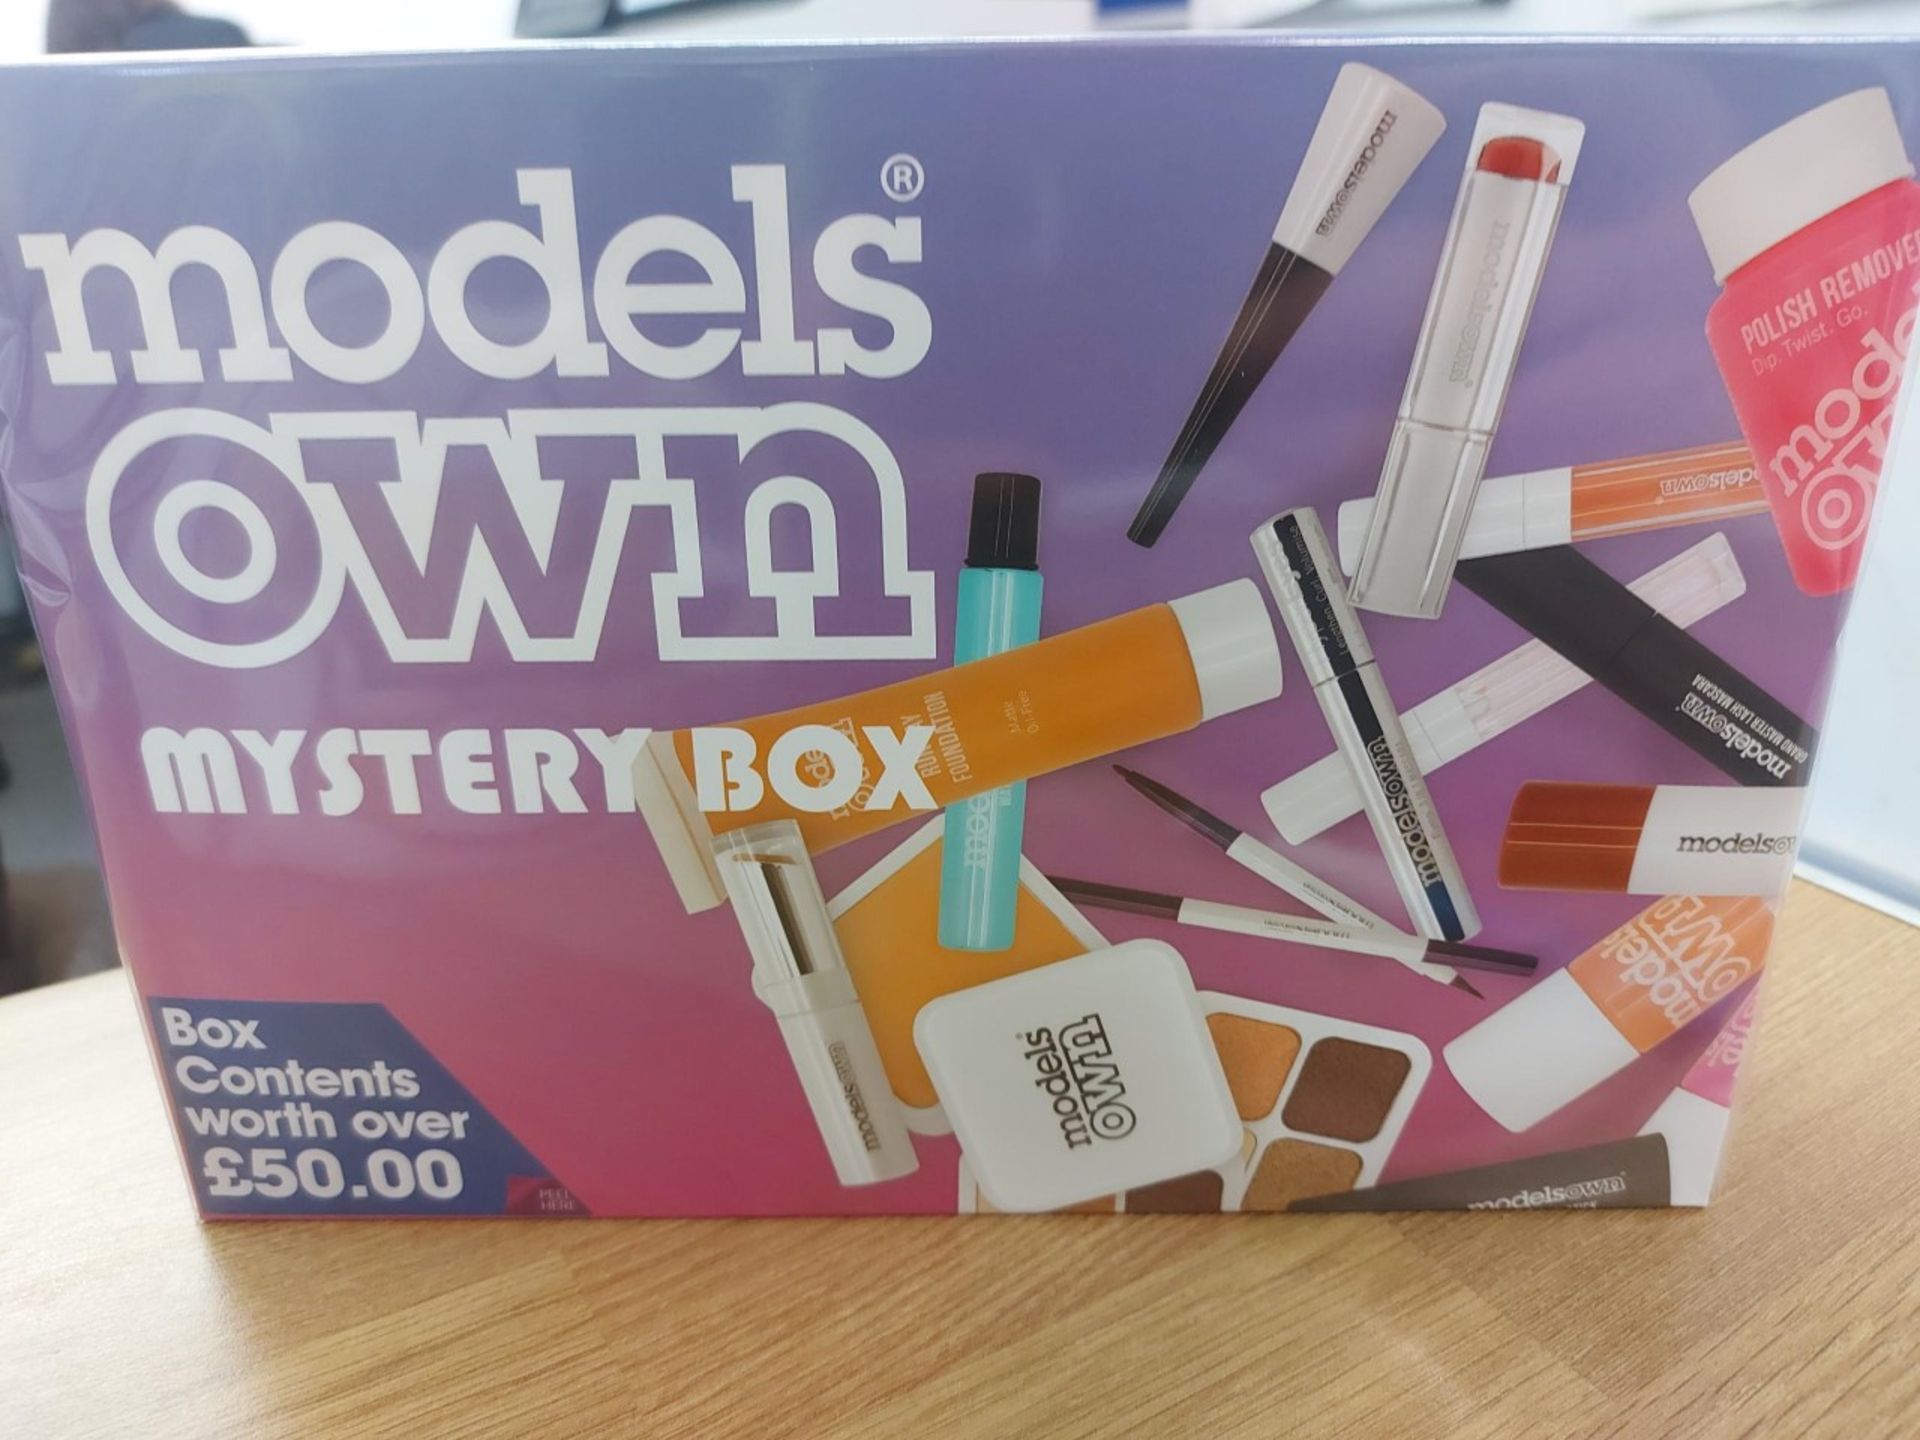 4 X NEW SEALED MODELS OWN MYSTERY MAKE UP BOXES. EACH BOX CONTAINS OVER £50 WORTH OF MODELS OWN MAKE